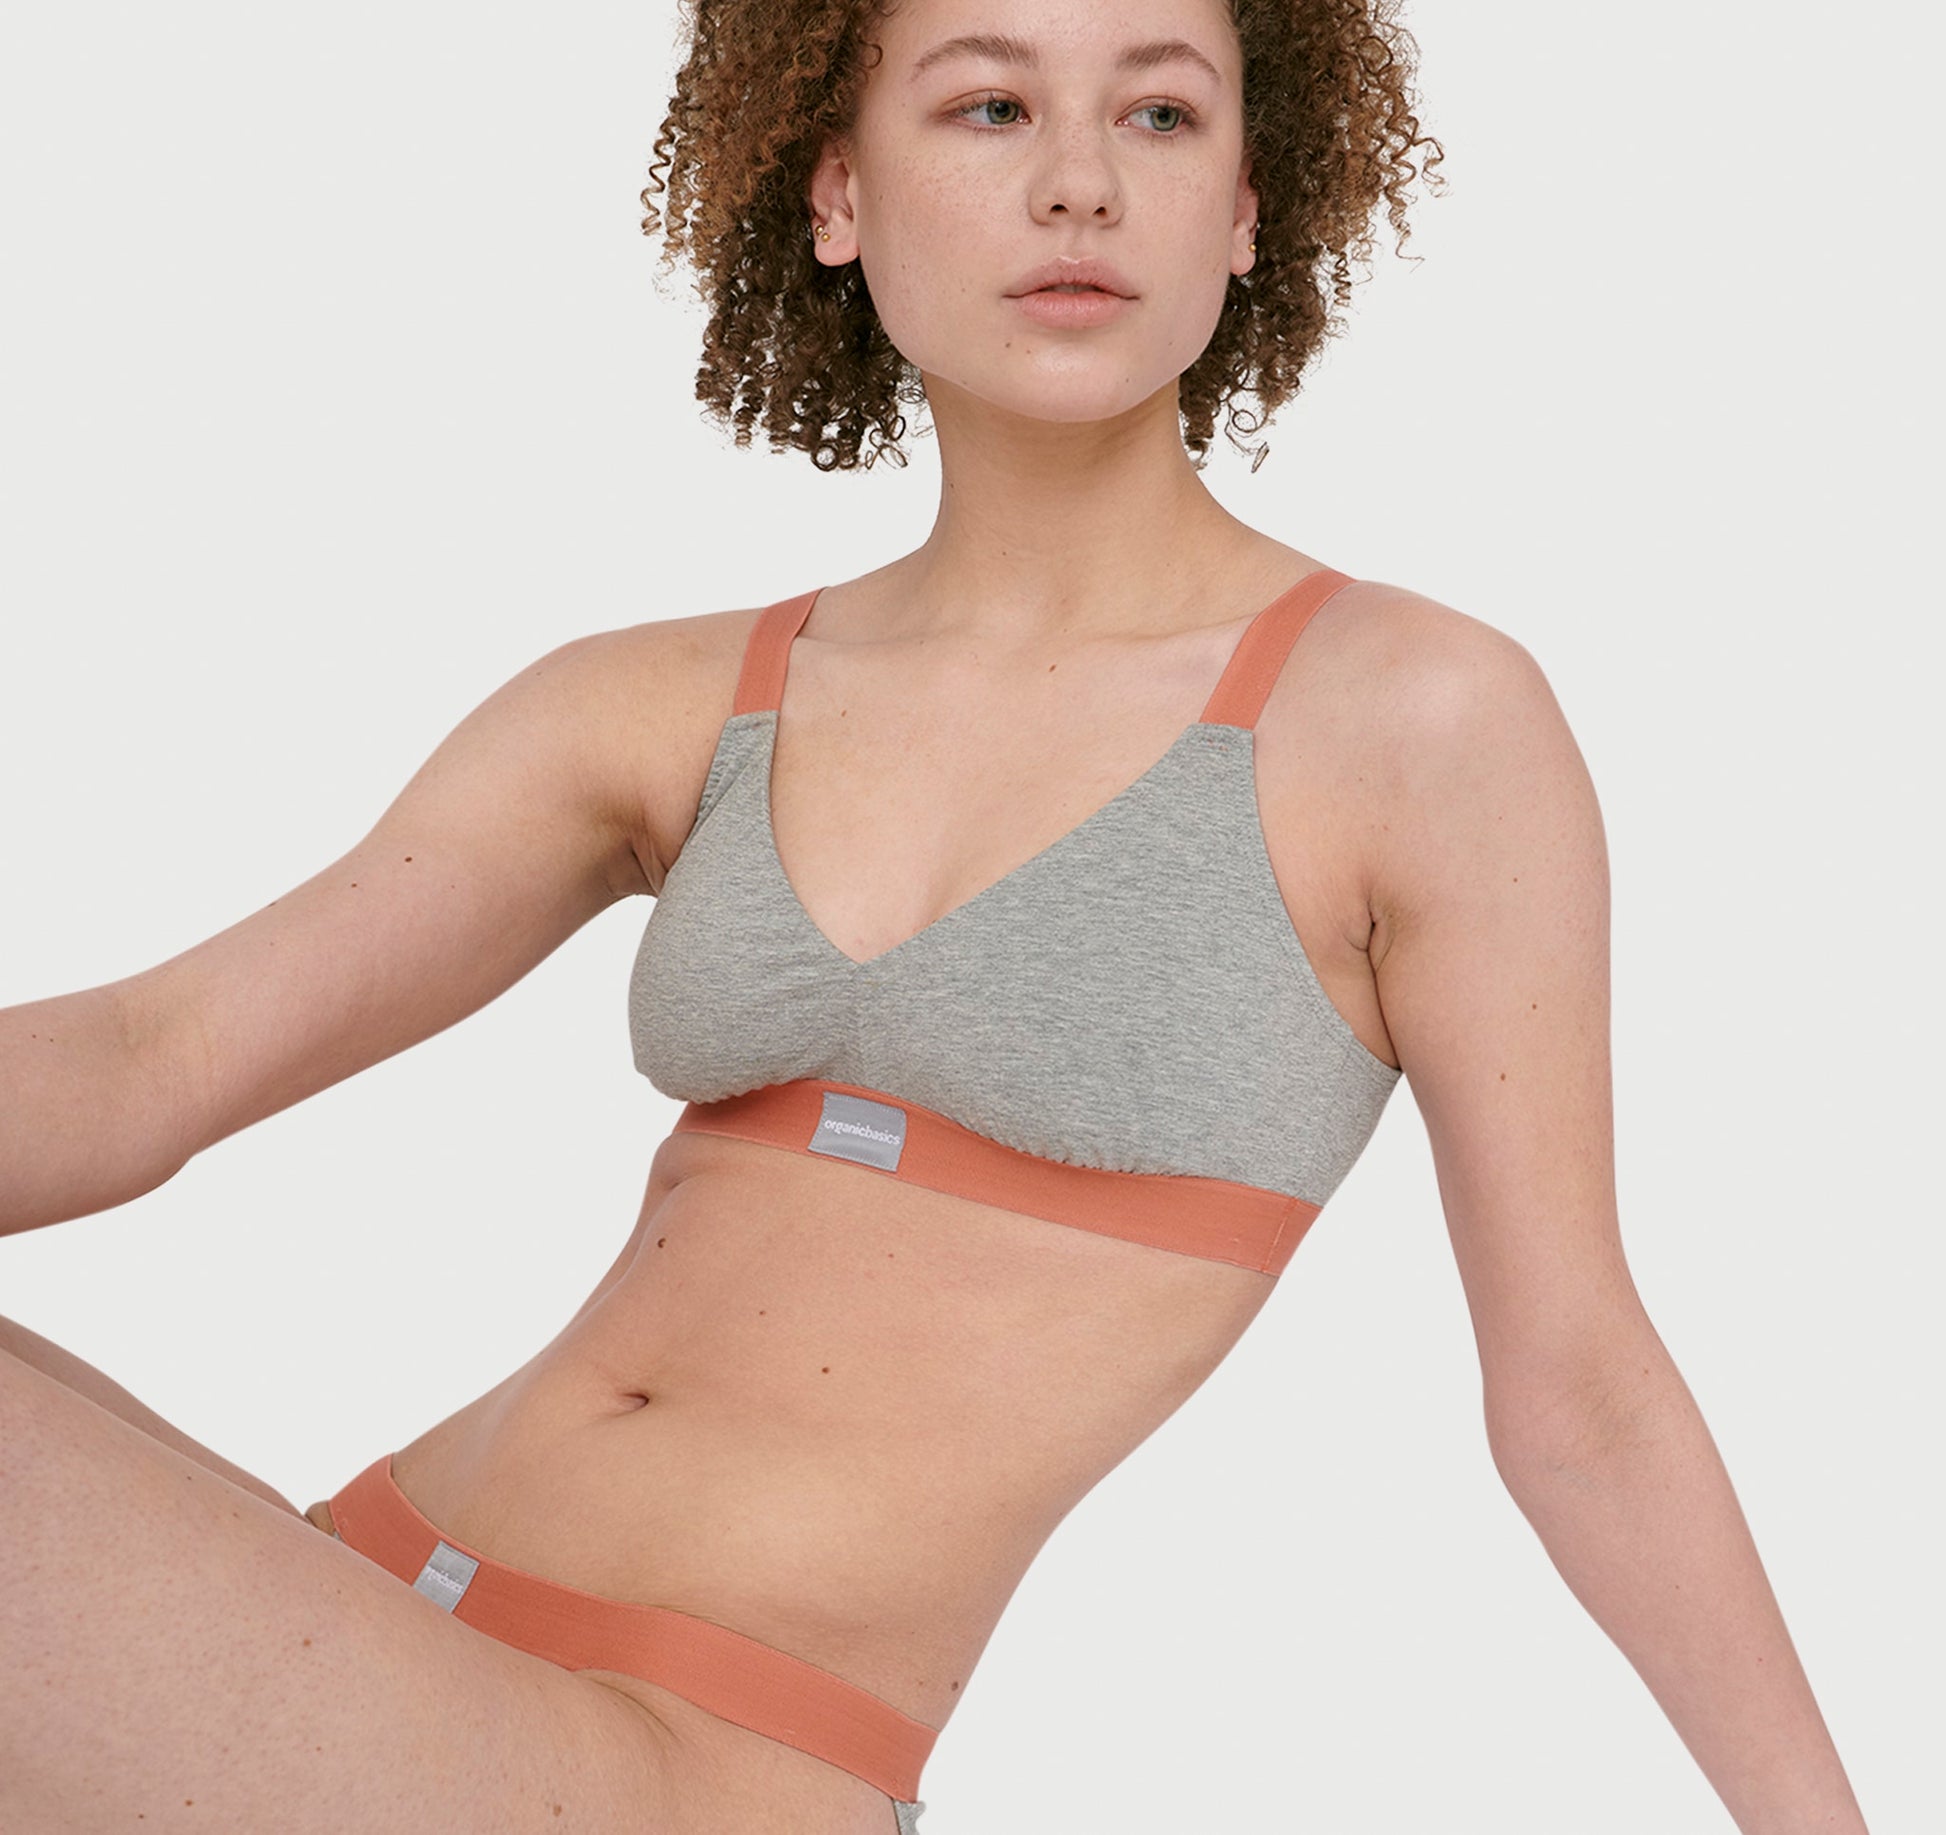 How a Lingerie Company Built Its Brand on Social Change - Shopify